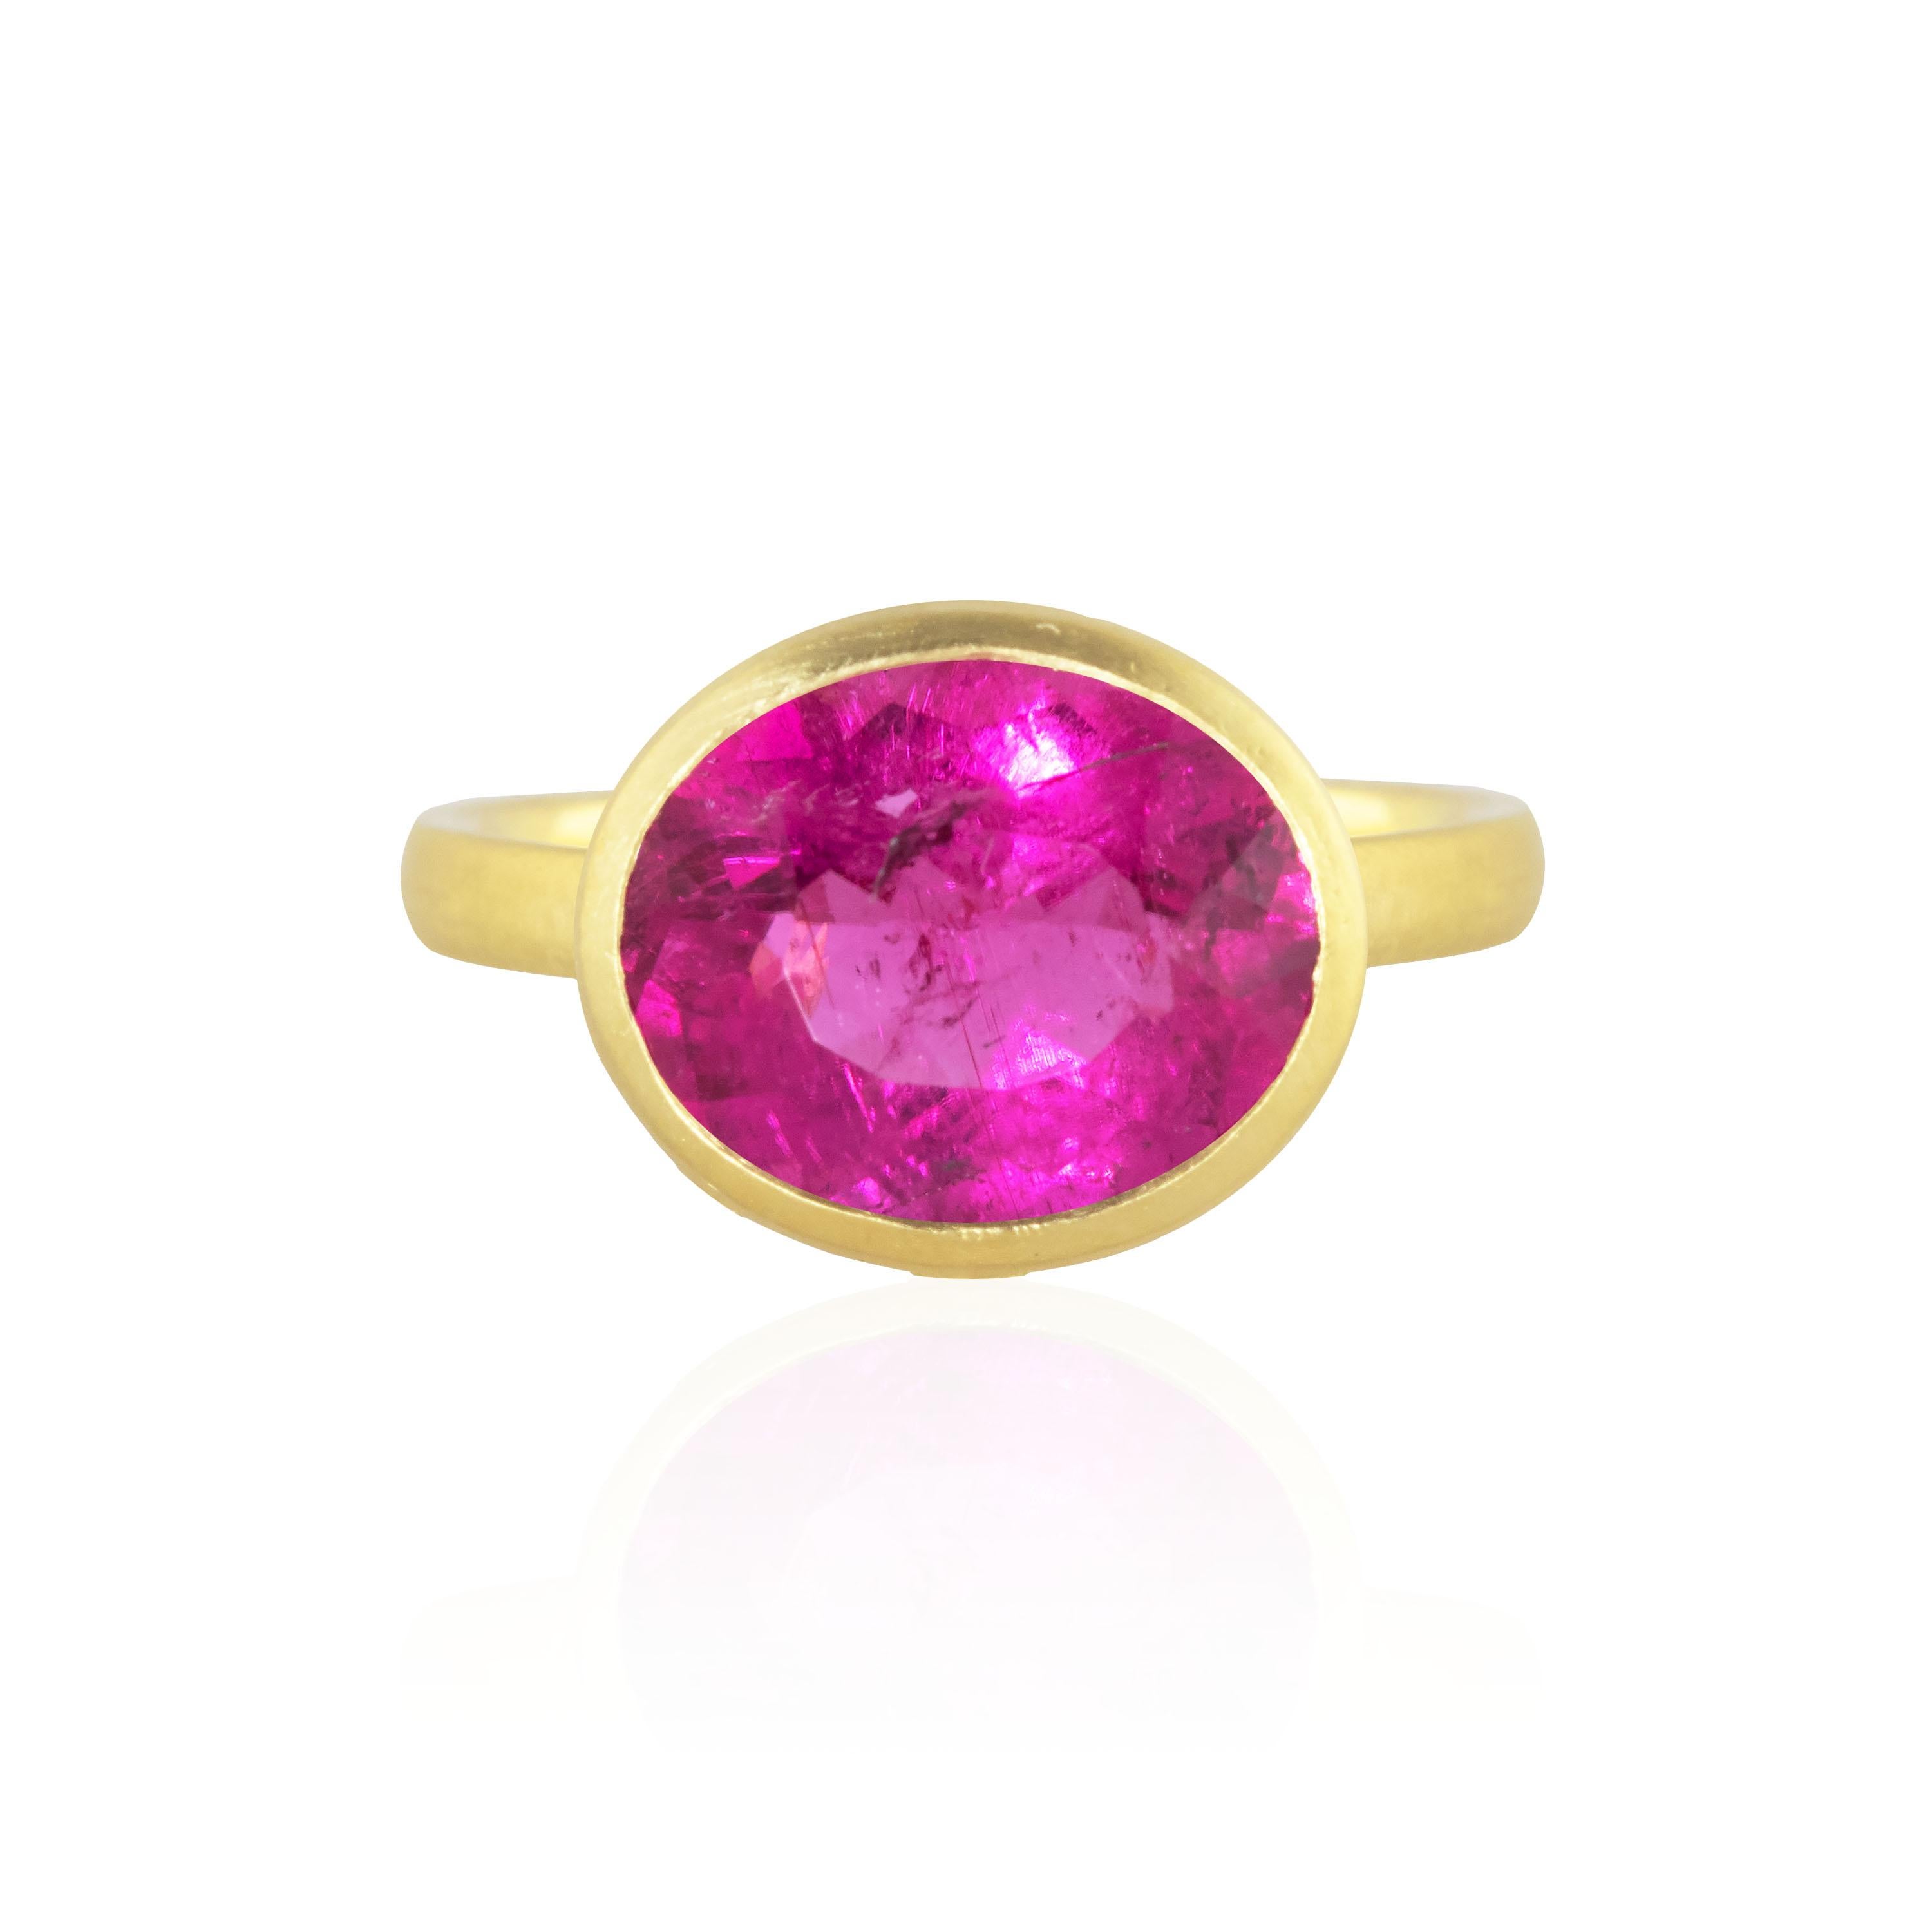 One of a kind wave ring featuring a 3.84 carat Rubellite Tourmaline in the center with a diamond bezel surrounding it.  Eight diamonds weighing .21carats decorate the waves along the gold bezel holding the stone.  Designed with an open back, based